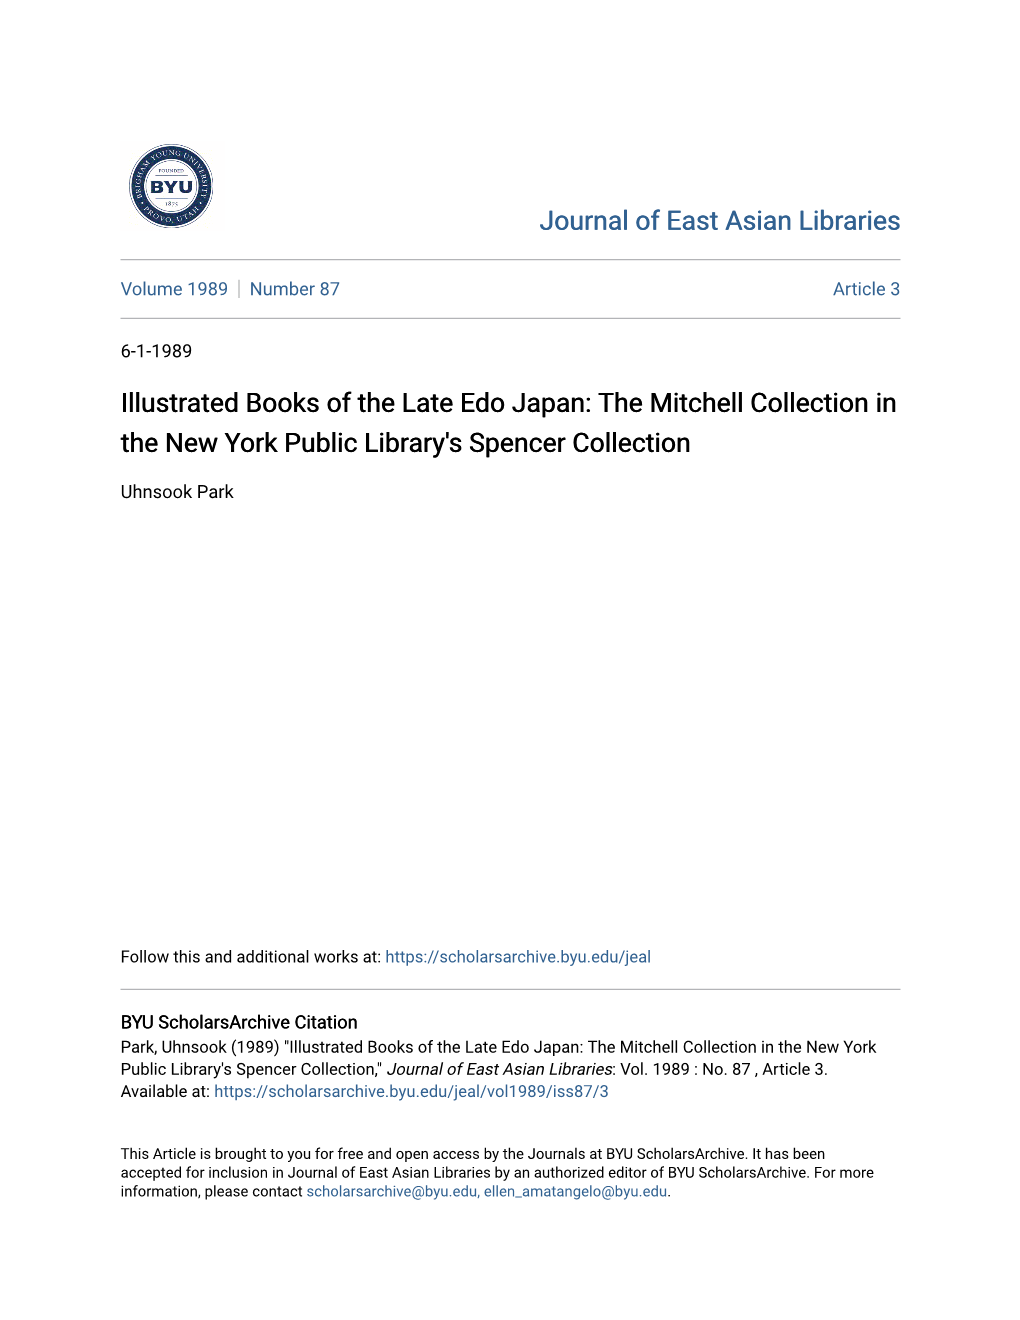 Illustrated Books of the Late Edo Japan: the Mitchell Collection in the New York Public Library's Spencer Collection